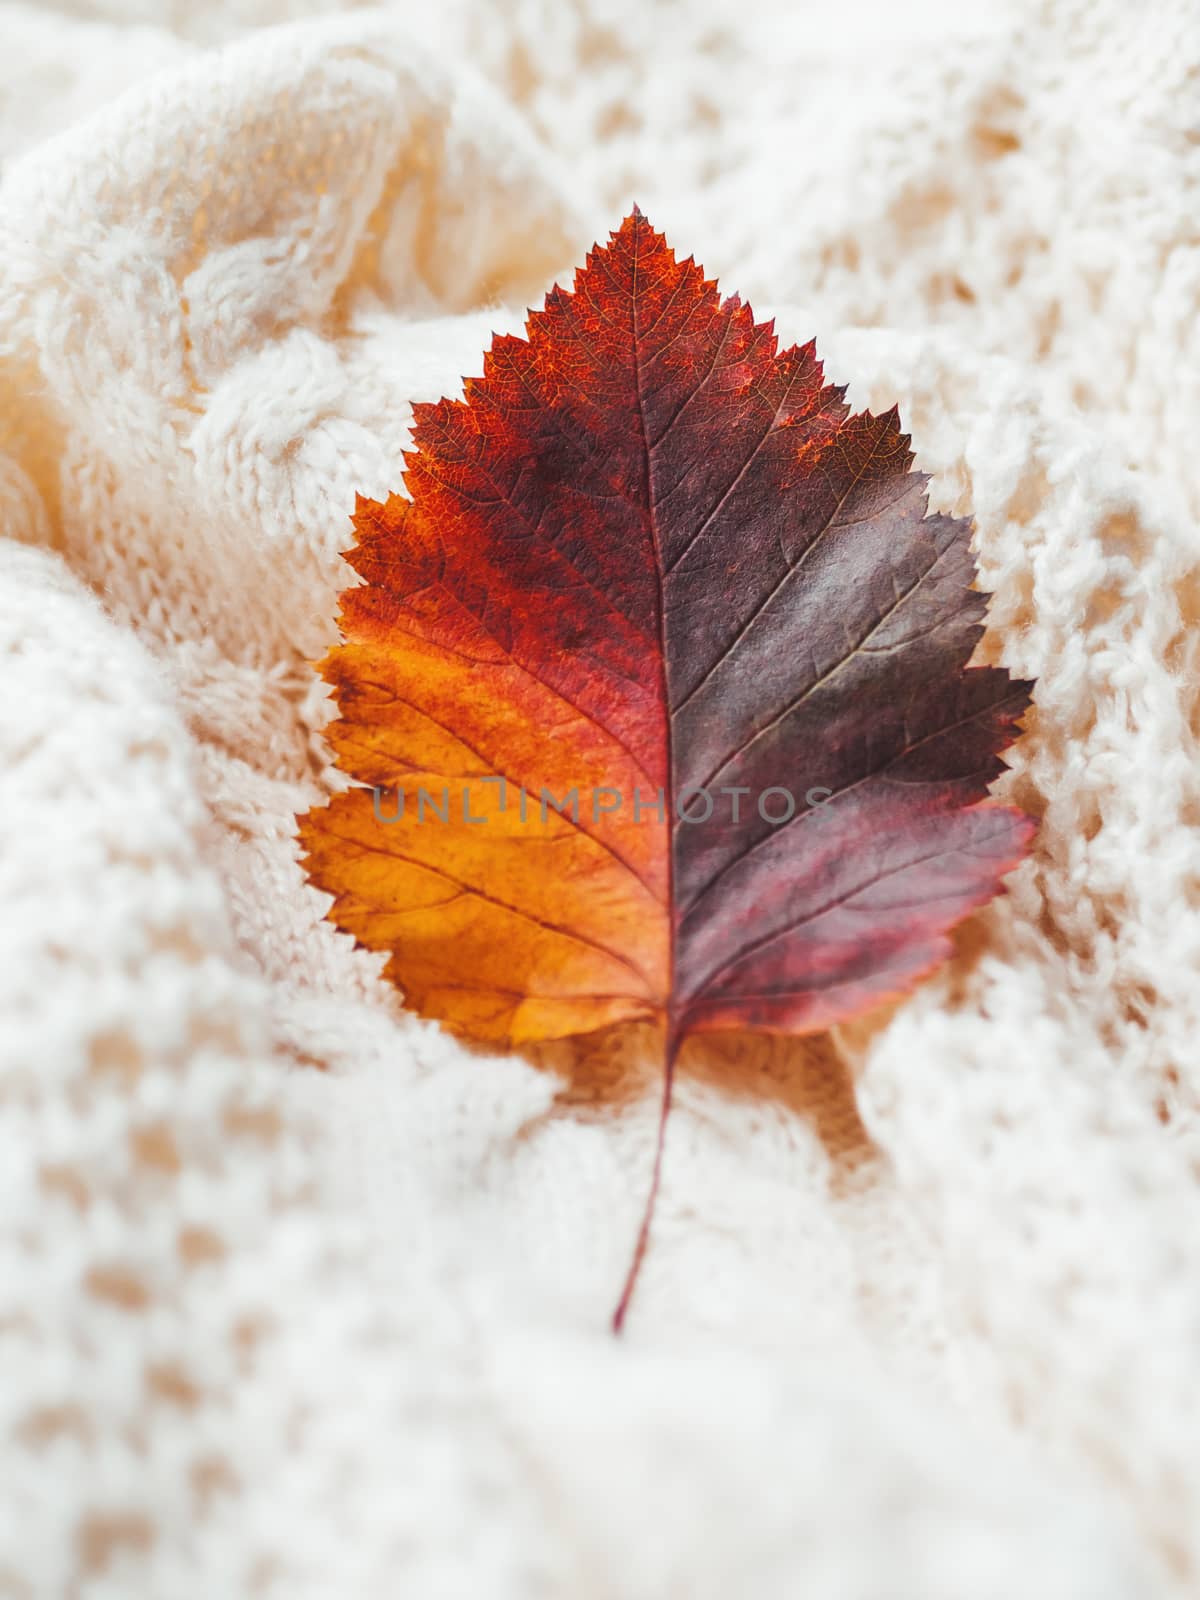 Bright and colorful autumn leaf on hand made cable-knit sweater sweater. Texture of warm knitted fabric with pattern. White crumpled cardigan. Cozy fall outfit for snuggle weather.